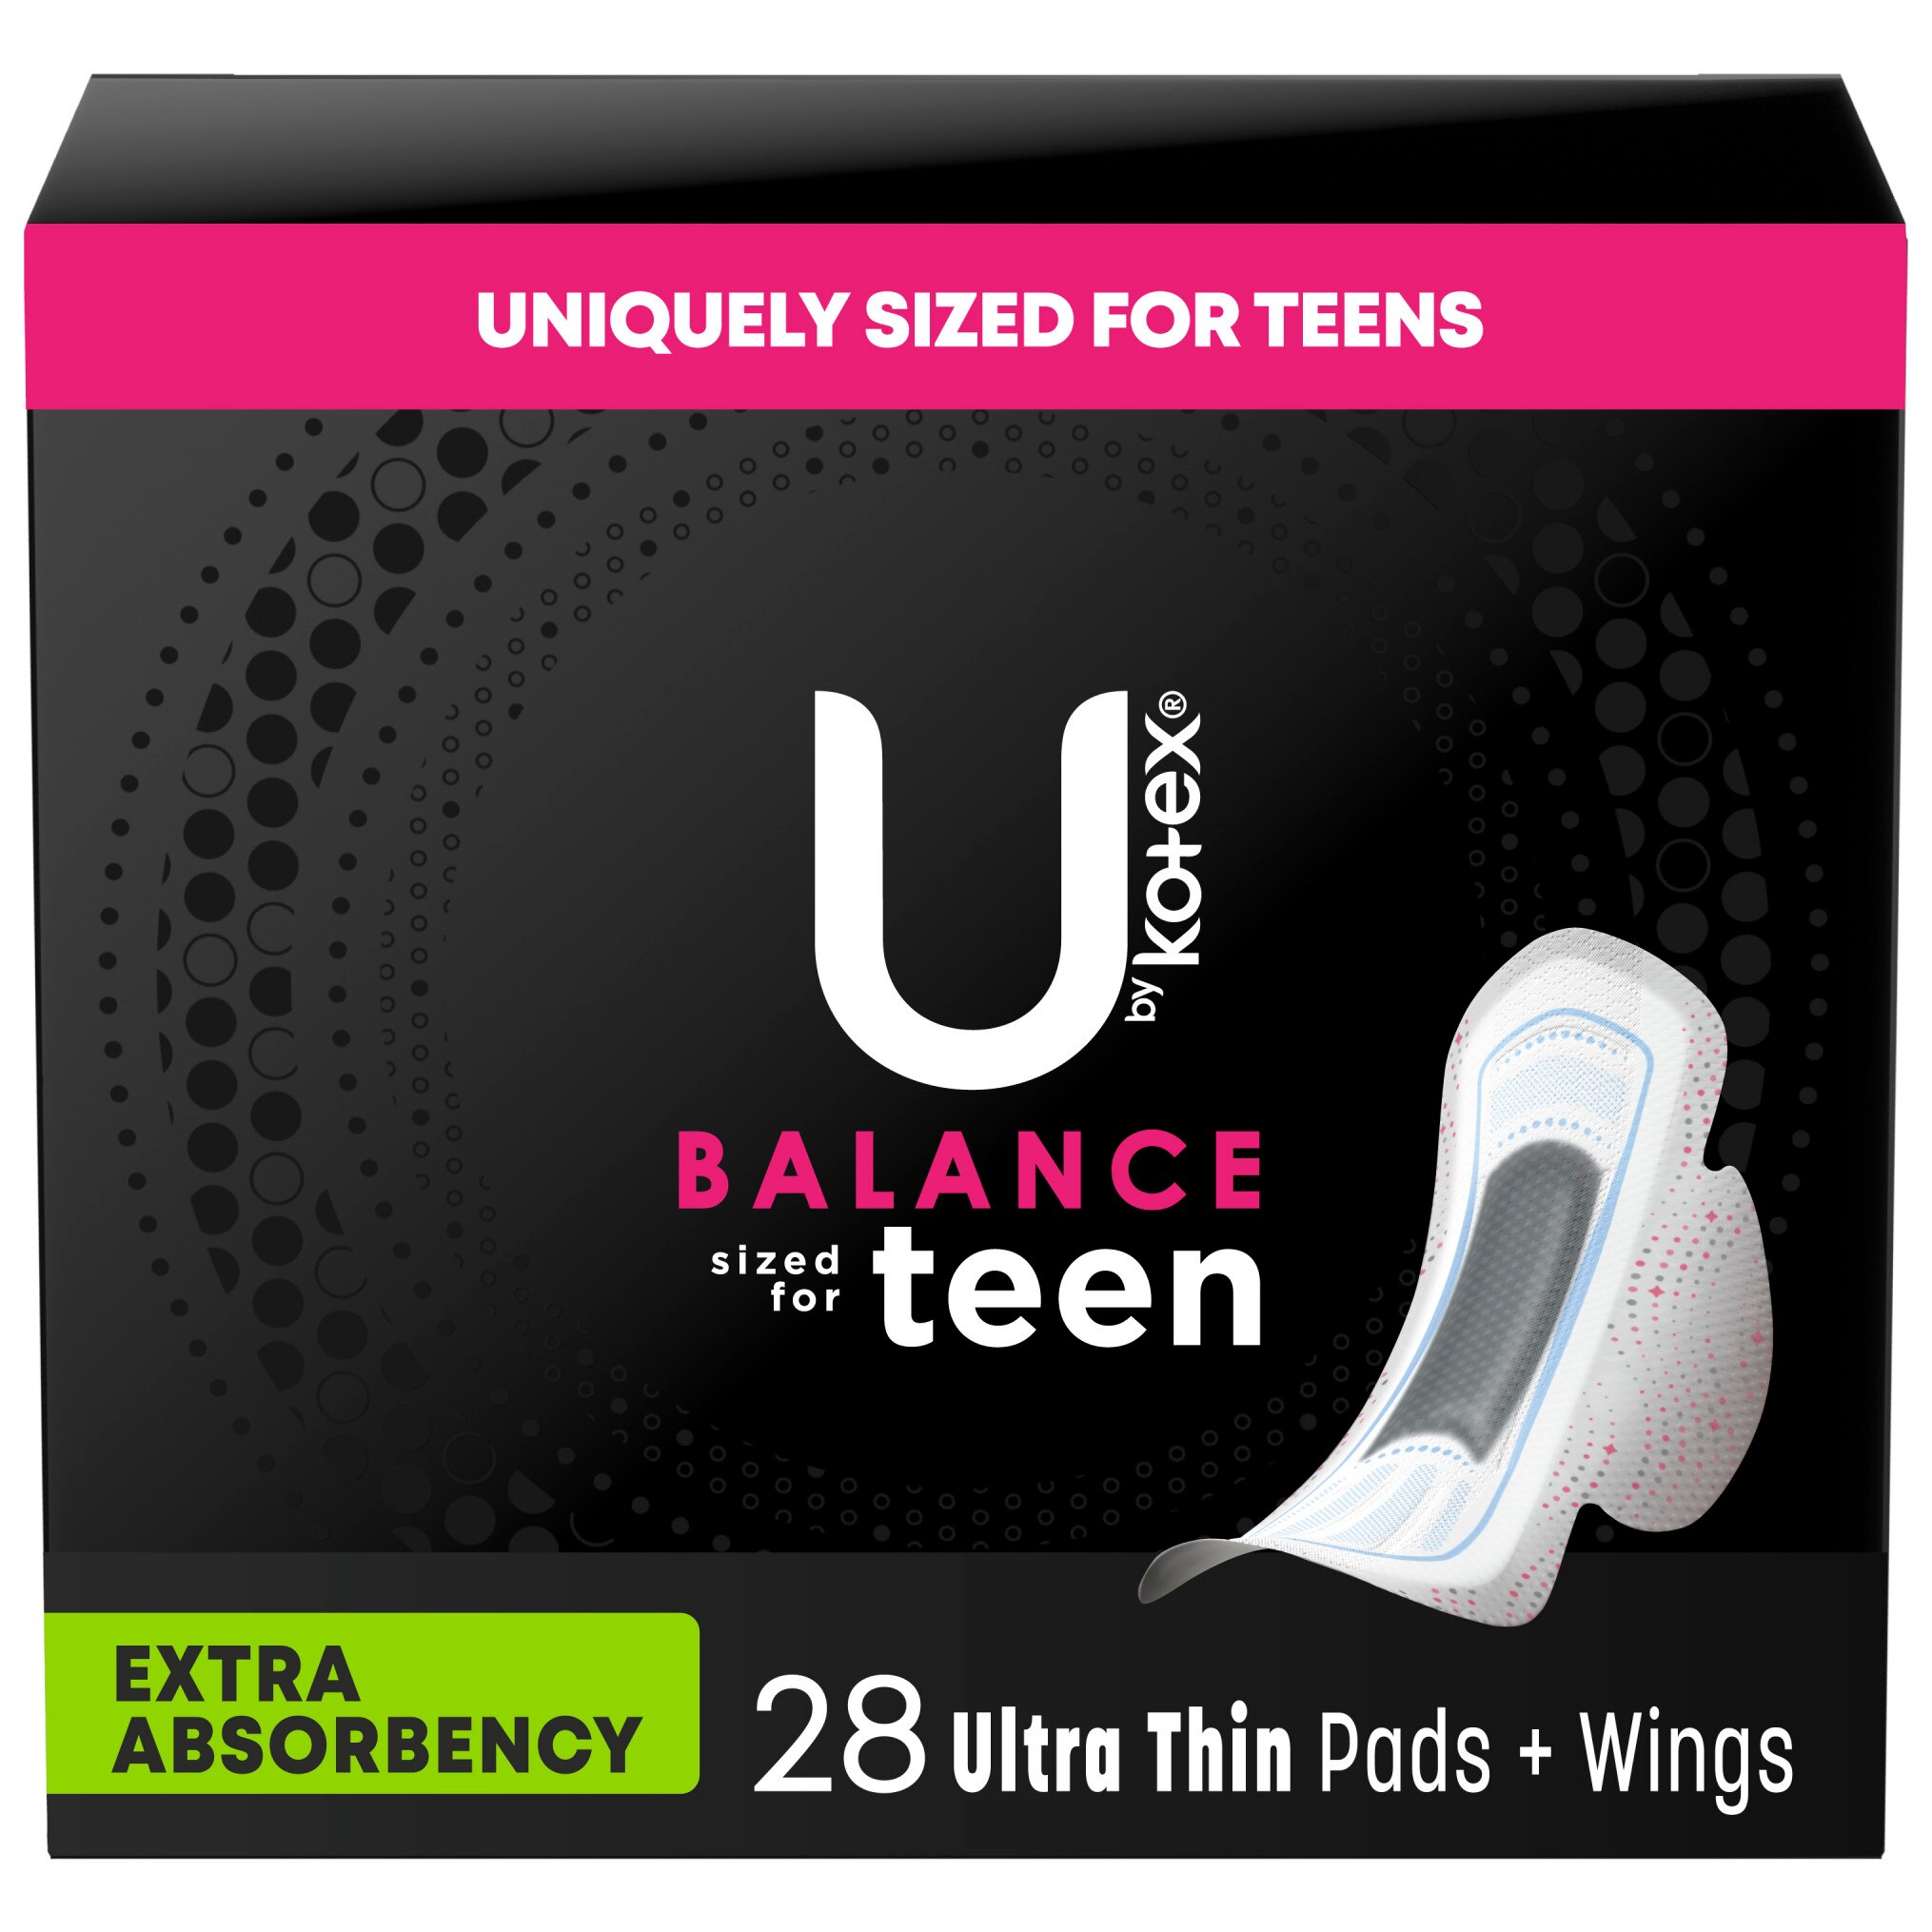  U by Kotex Ultra Thin Teen Pads with Wings, 34 Count 